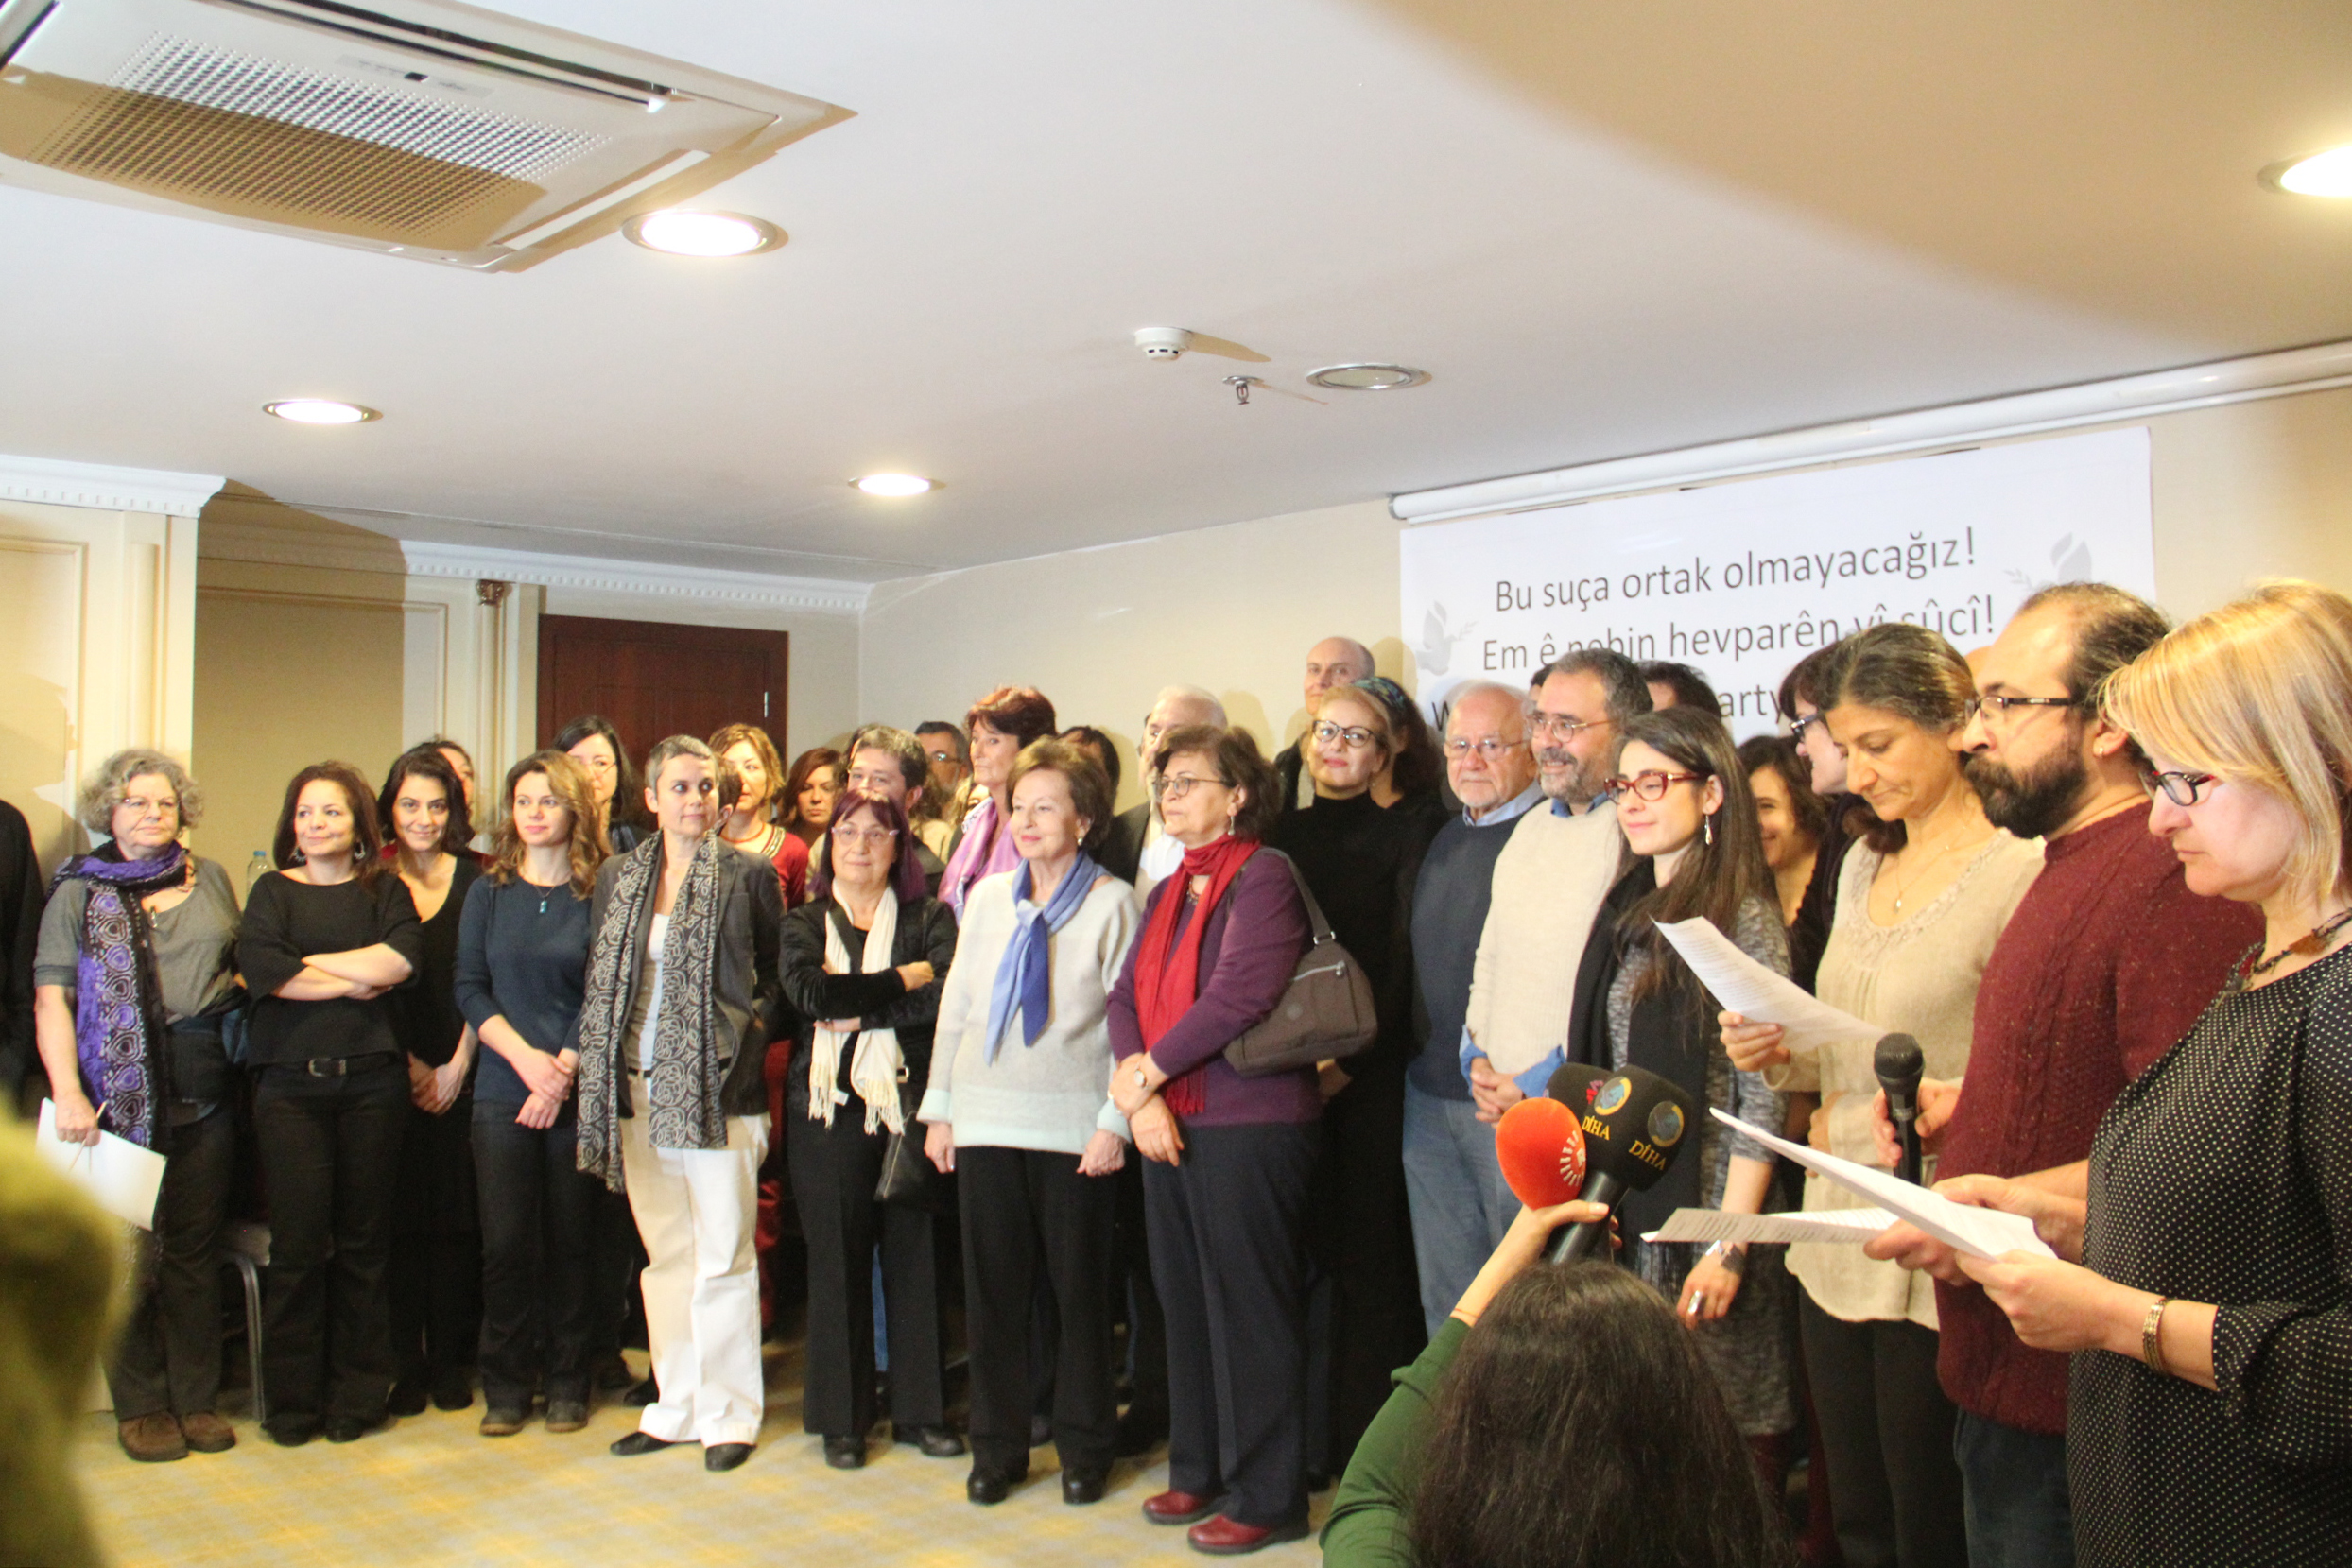 The photo is from the press conference that took place on 11 January 2016, announcing the peace appeal by 1,128 academics. Esra Mungan, Muzaffer Kaya, Kıvanç Ersoy and Meral Camcı are four academics currently held in pre-trial detention in Istanbul after they held a press conference on 10 March 2016, reiterating their support for a statement they had signed in January. The appeal for peace criticizing ongoing curfews and security operations in south eastern Turkey and calling for a resumption of peace talks between Turkey and the armed Kurdistan Workers’ Party (PKK). A further 1,084 academics since signed to appeal, bringing the total to 2,212 signatories.